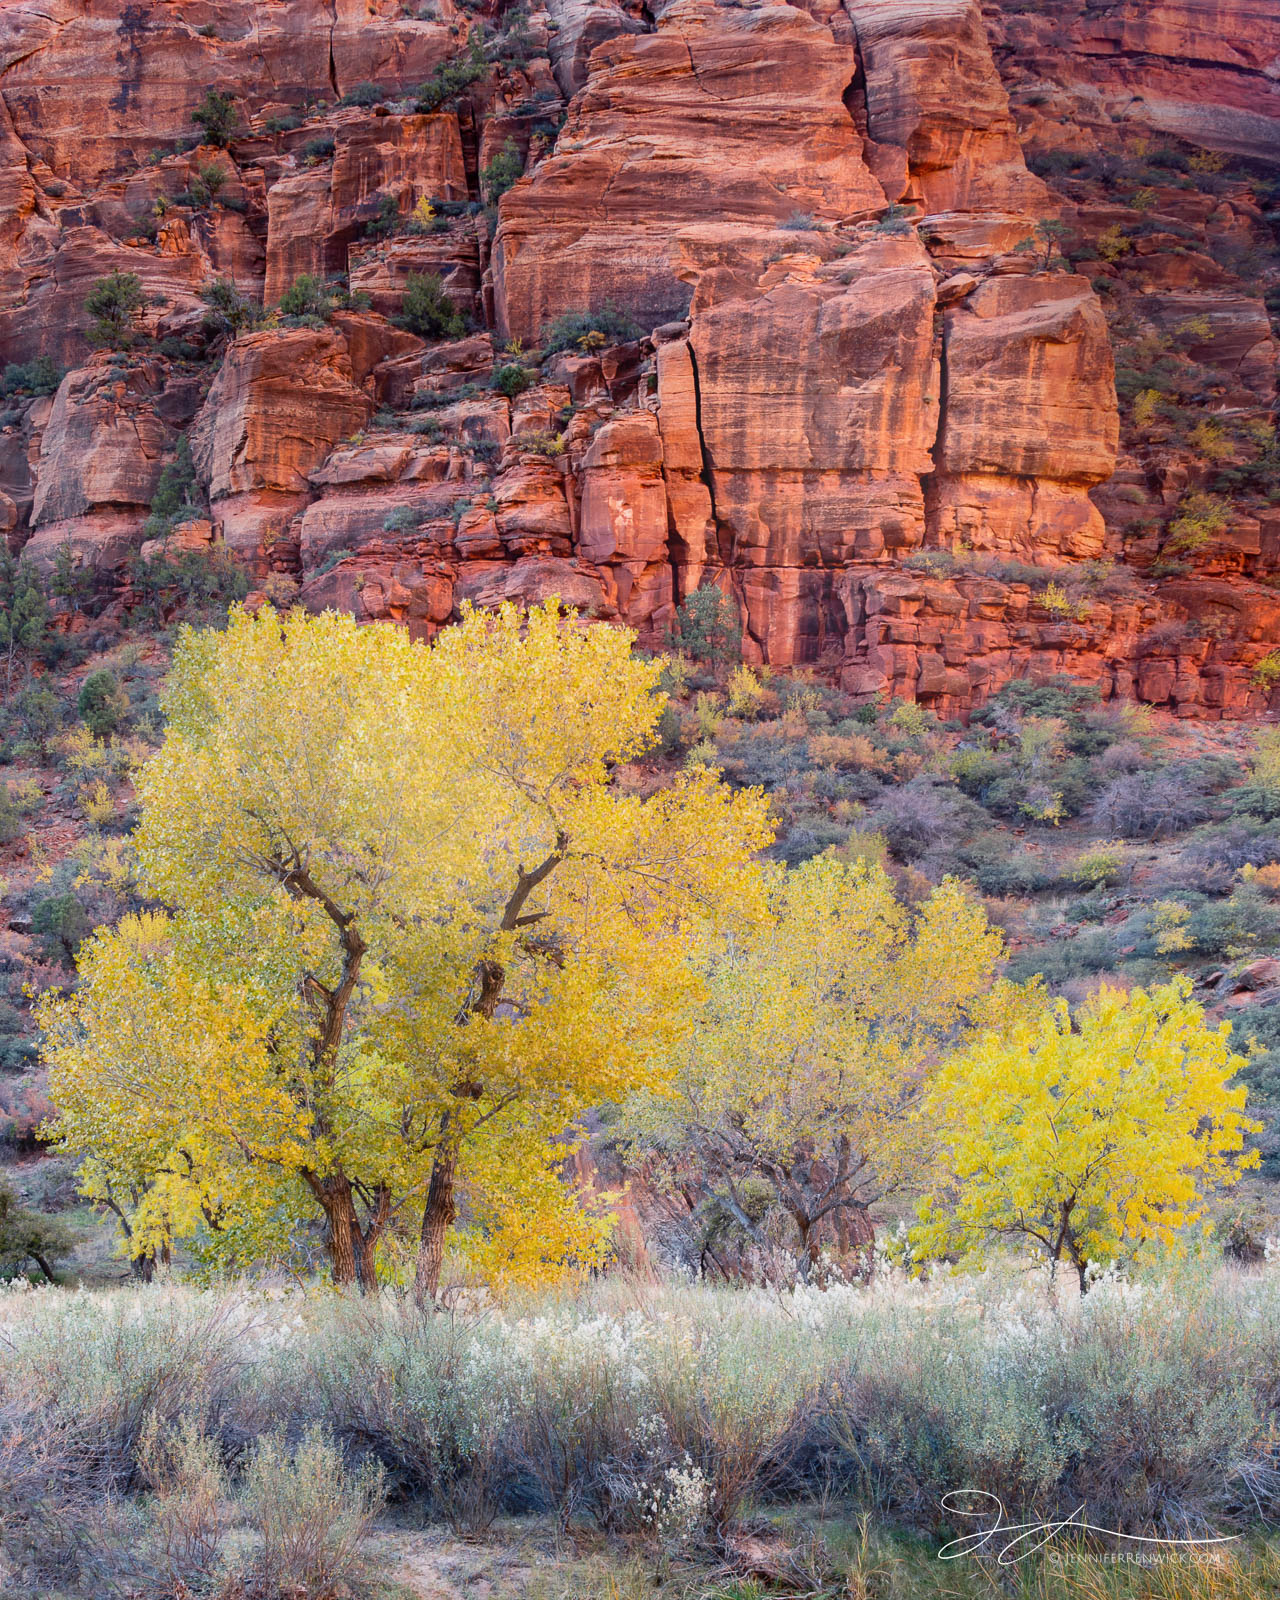 Cottonwood trees bask in the warm reflected light in Zion Canyon.